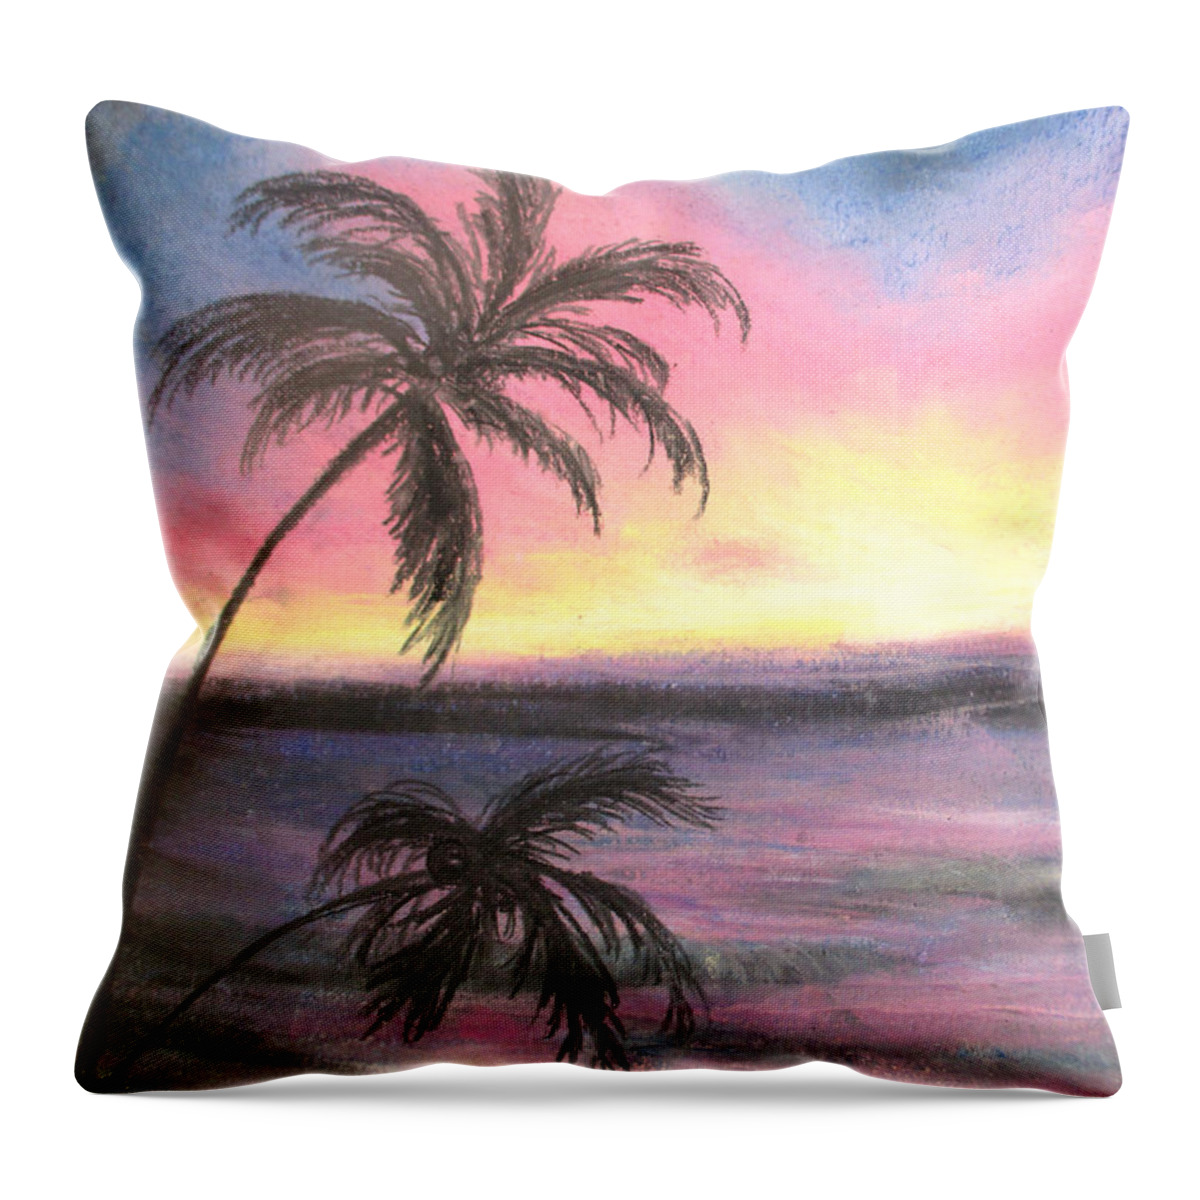 Palm Sunset Throw Pillow featuring the painting Palm Set by Jen Shearer